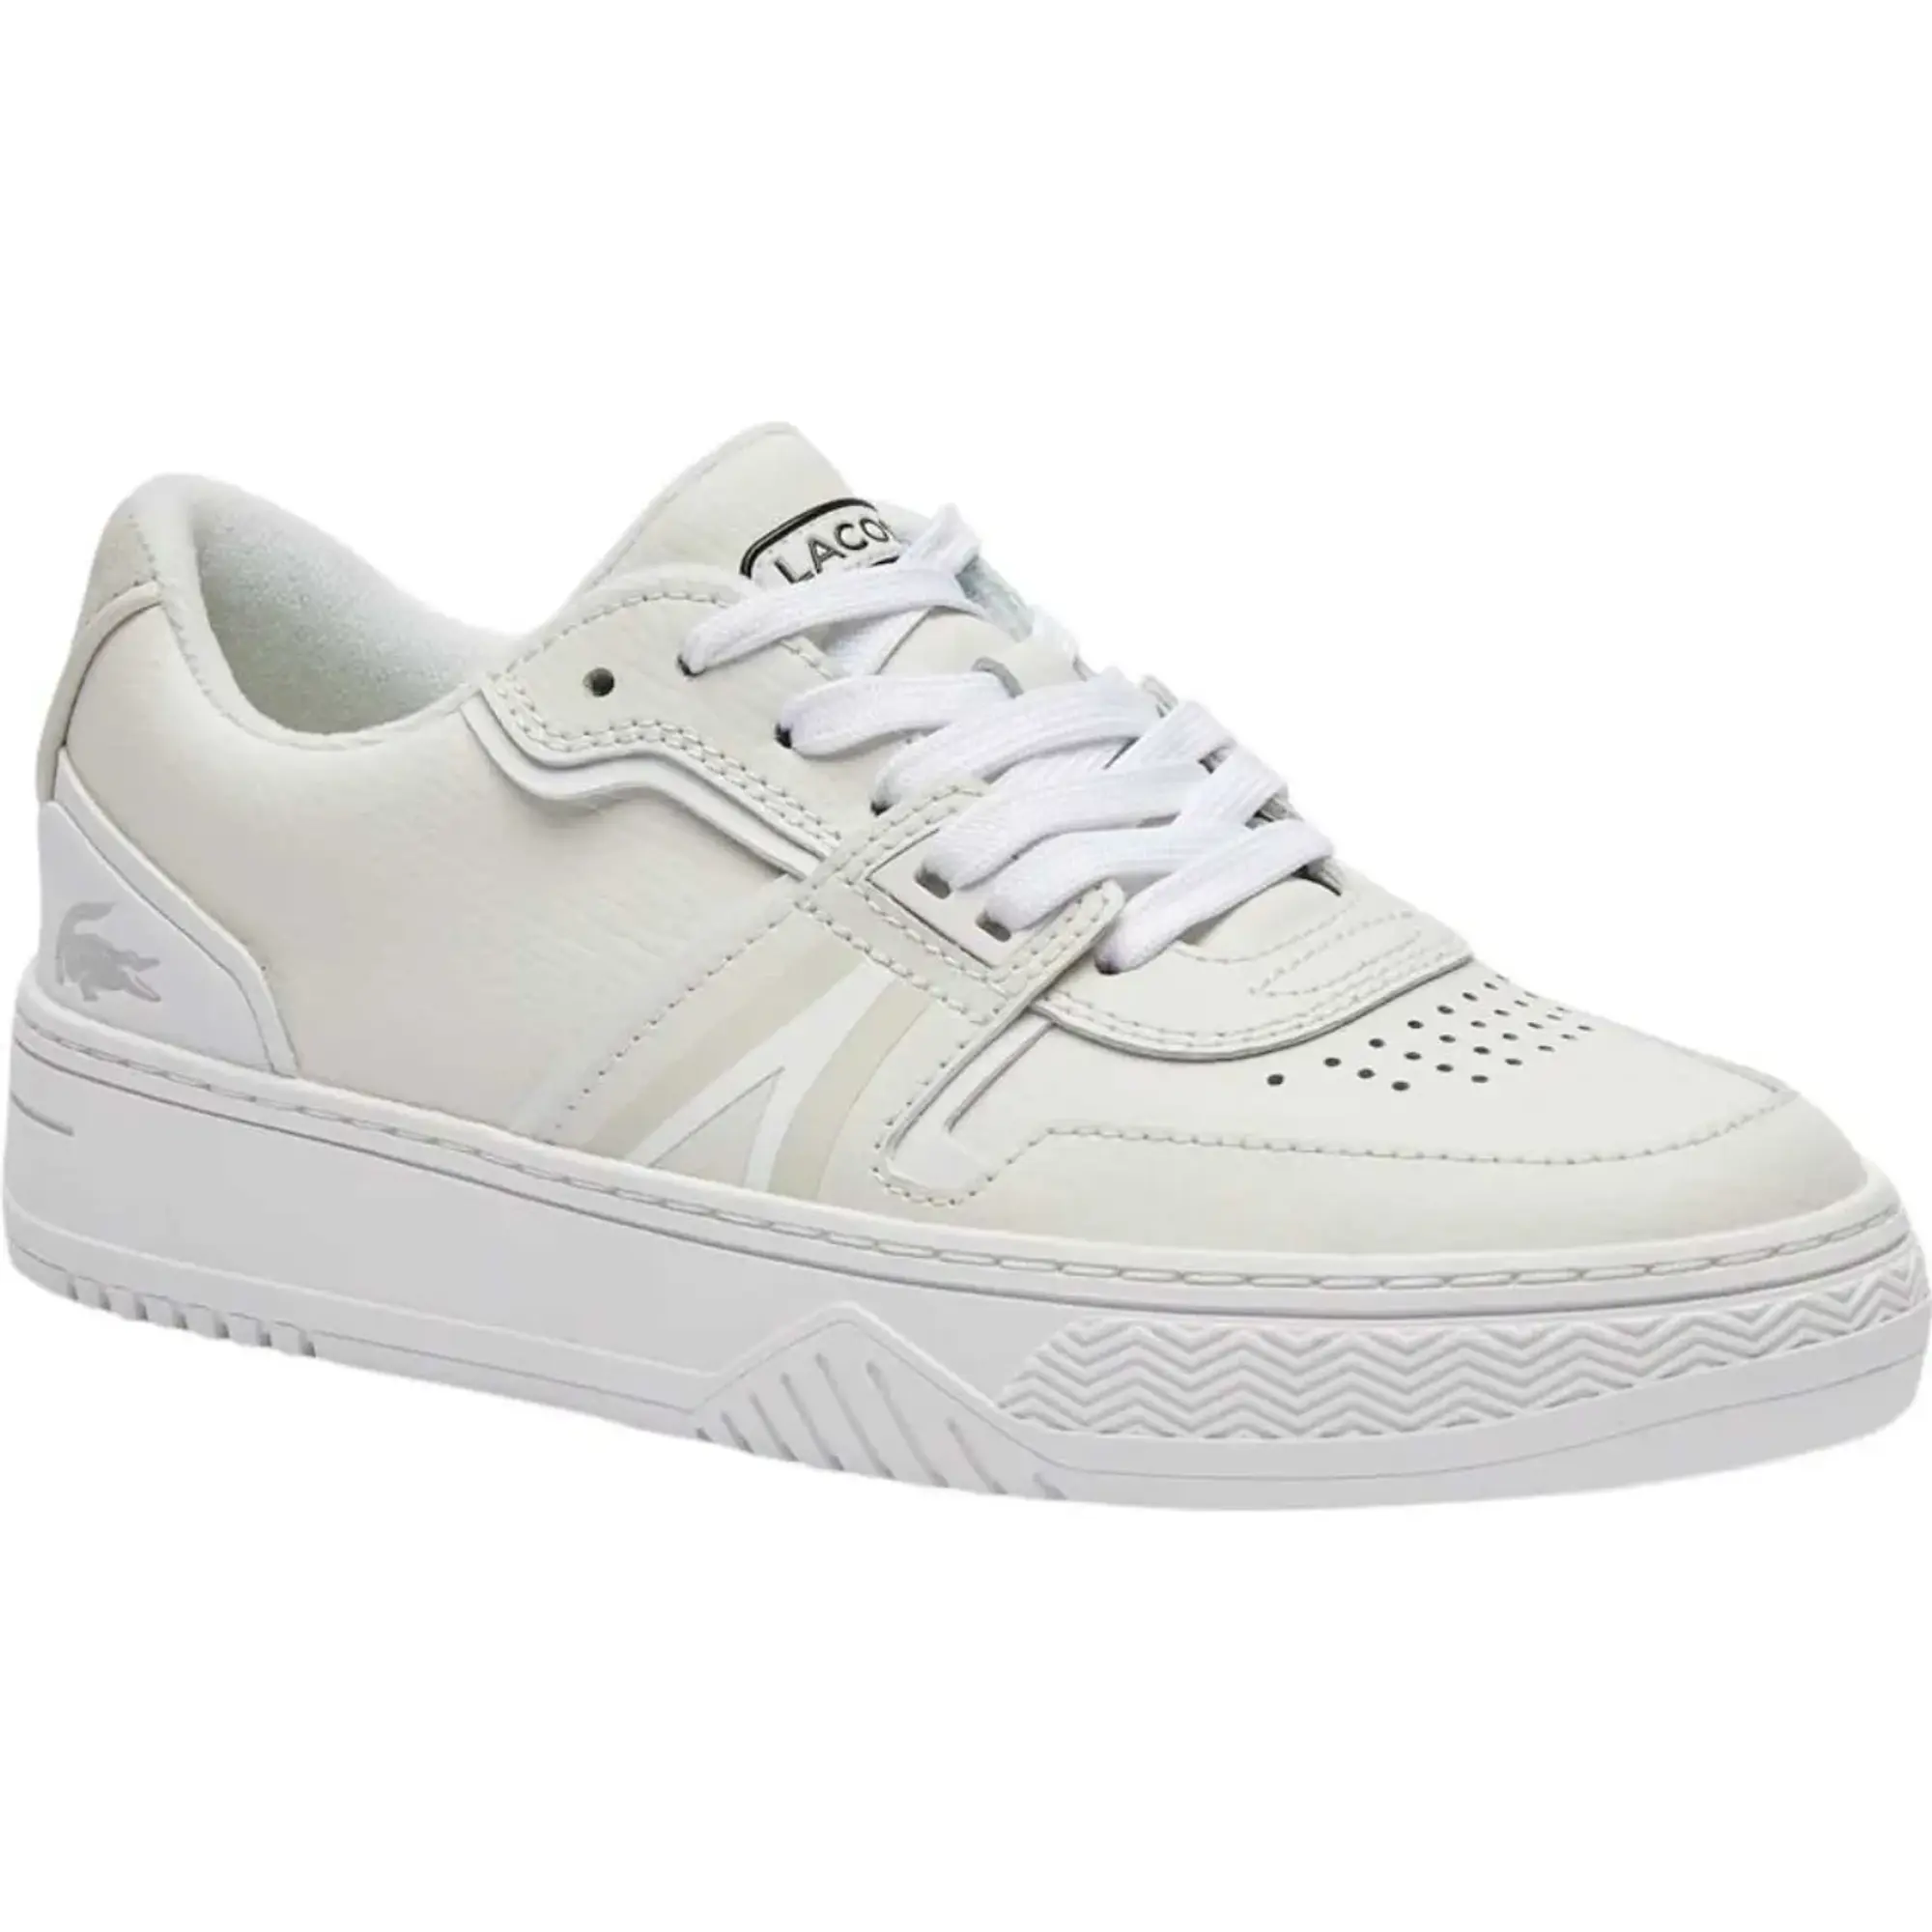 Lacoste l001 trainers in white